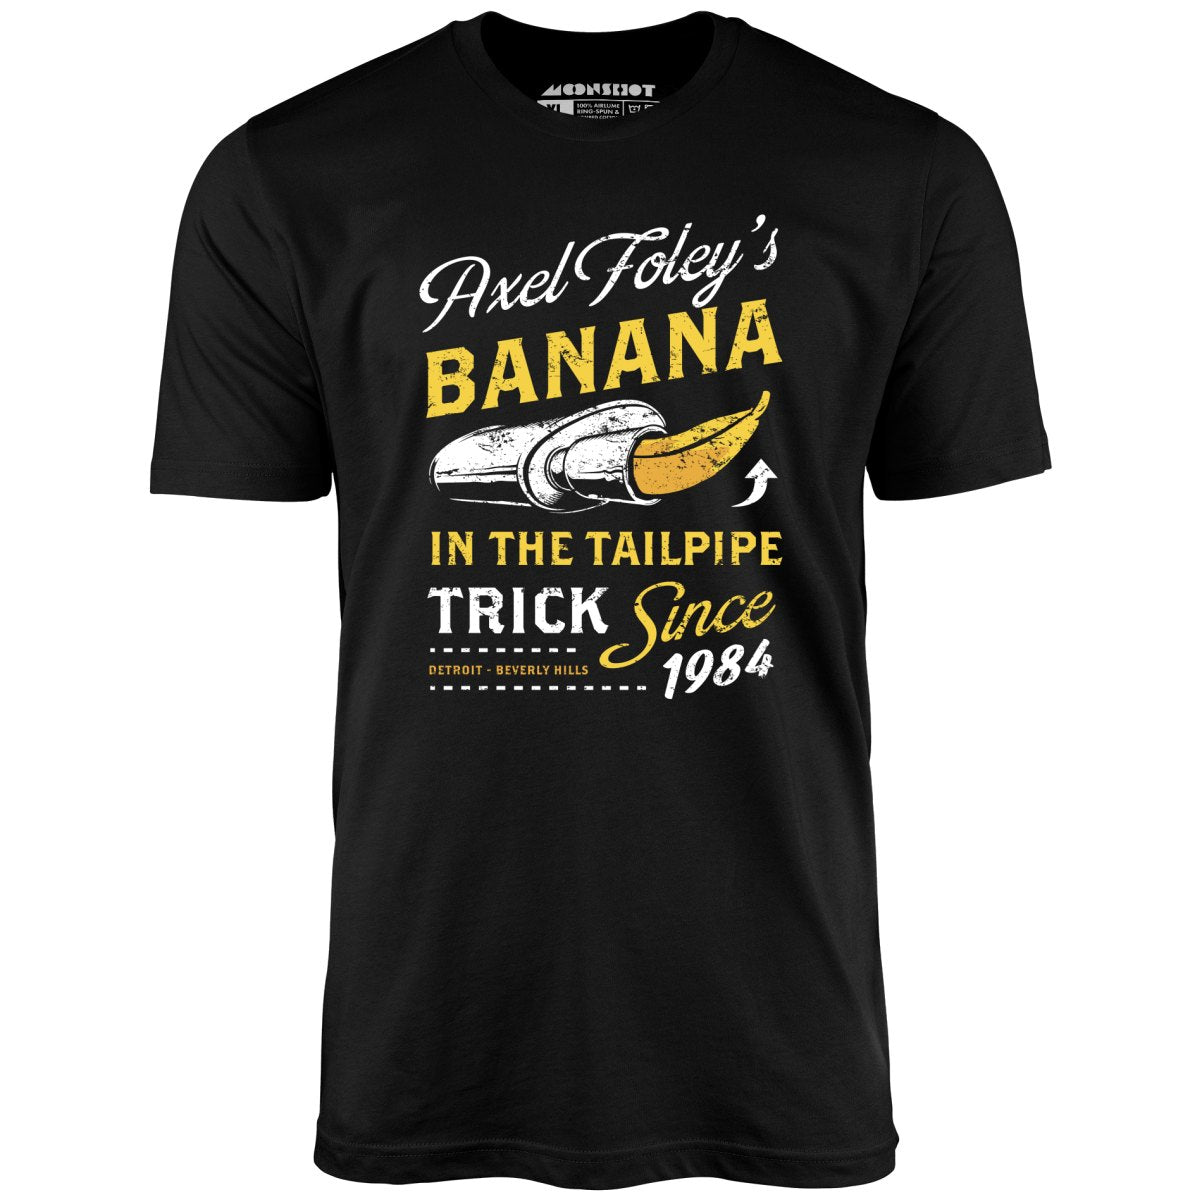 Axel Foley's Banana in the Tailpipe Trick - Unisex T-Shirt